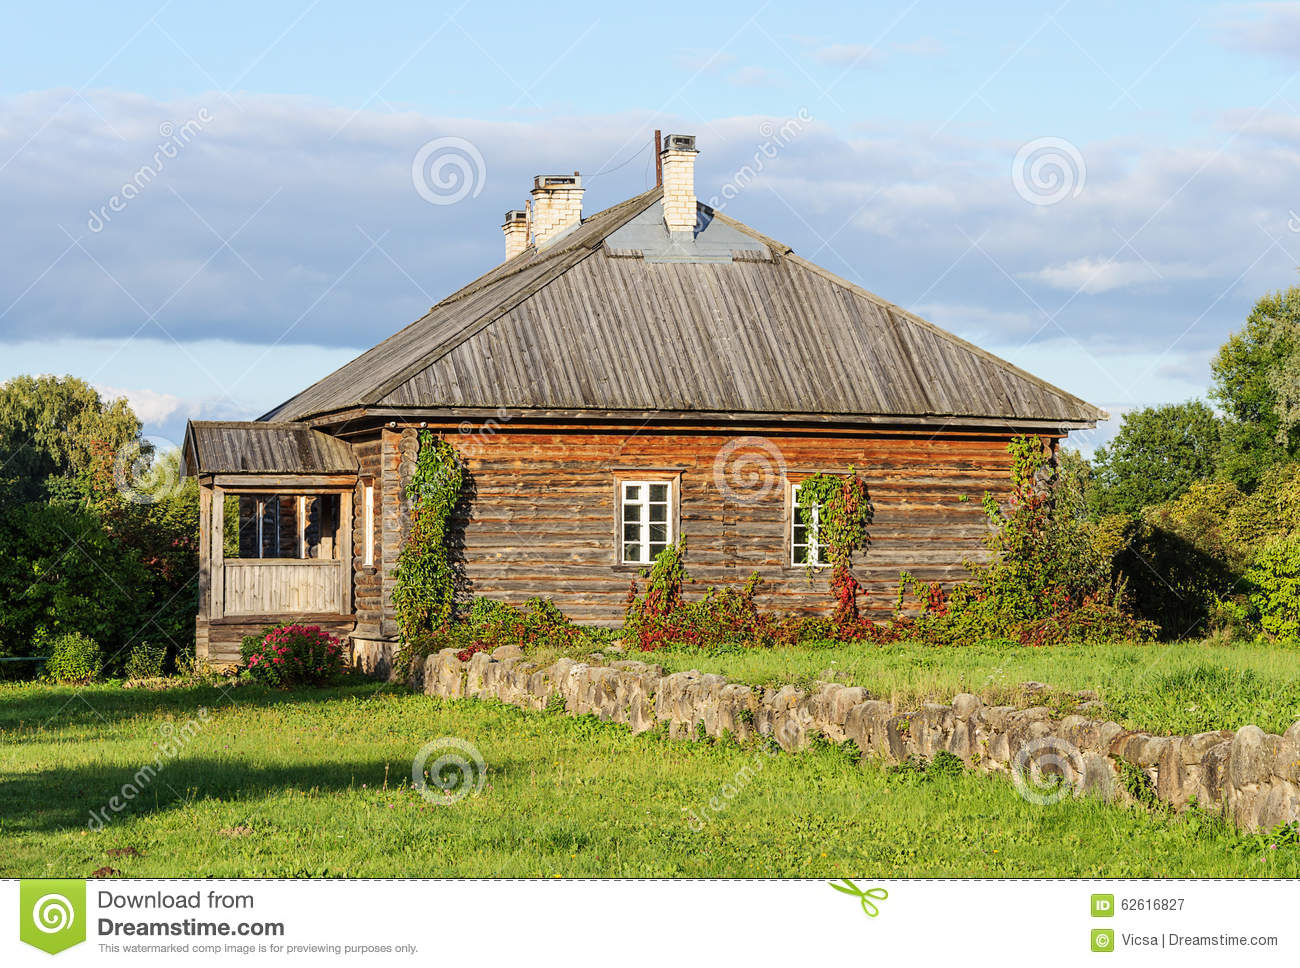 wooden country house photo - 5